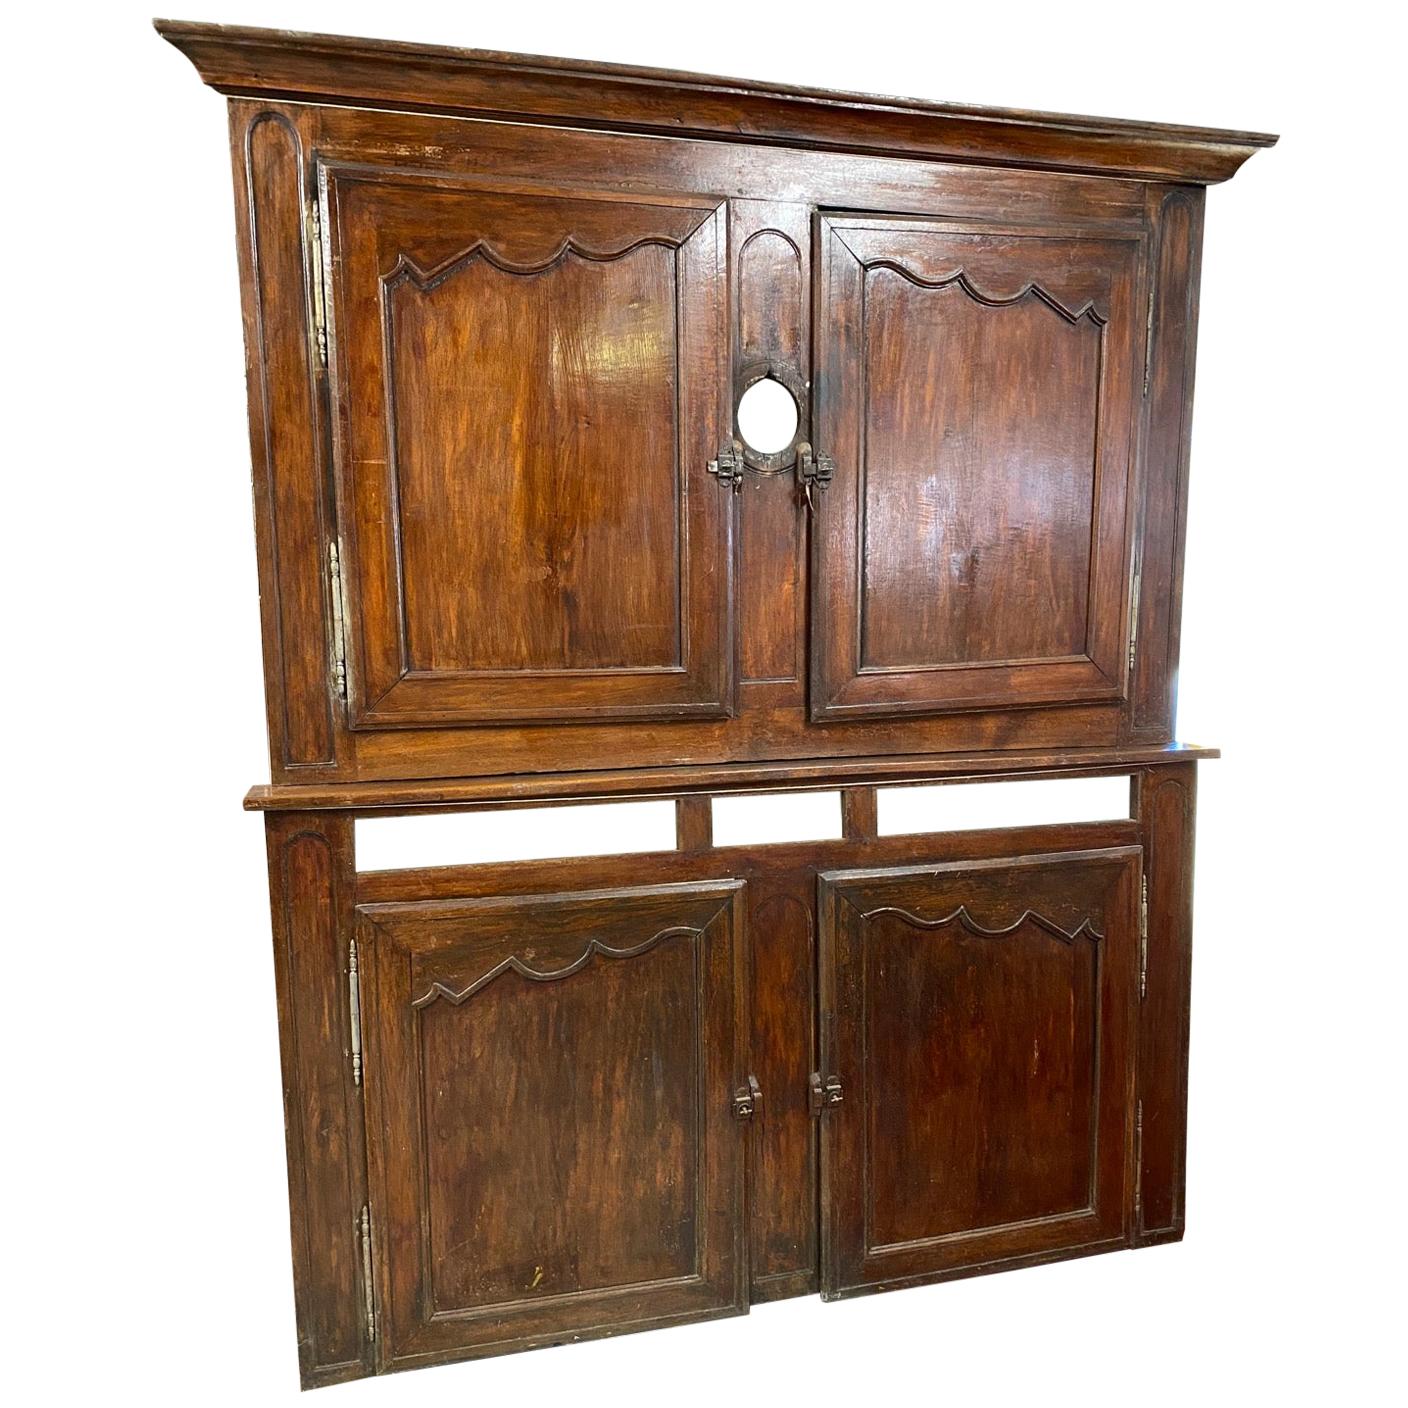 Late 18th Century French Paneled Boiserie Storage Wall Unit For Sale